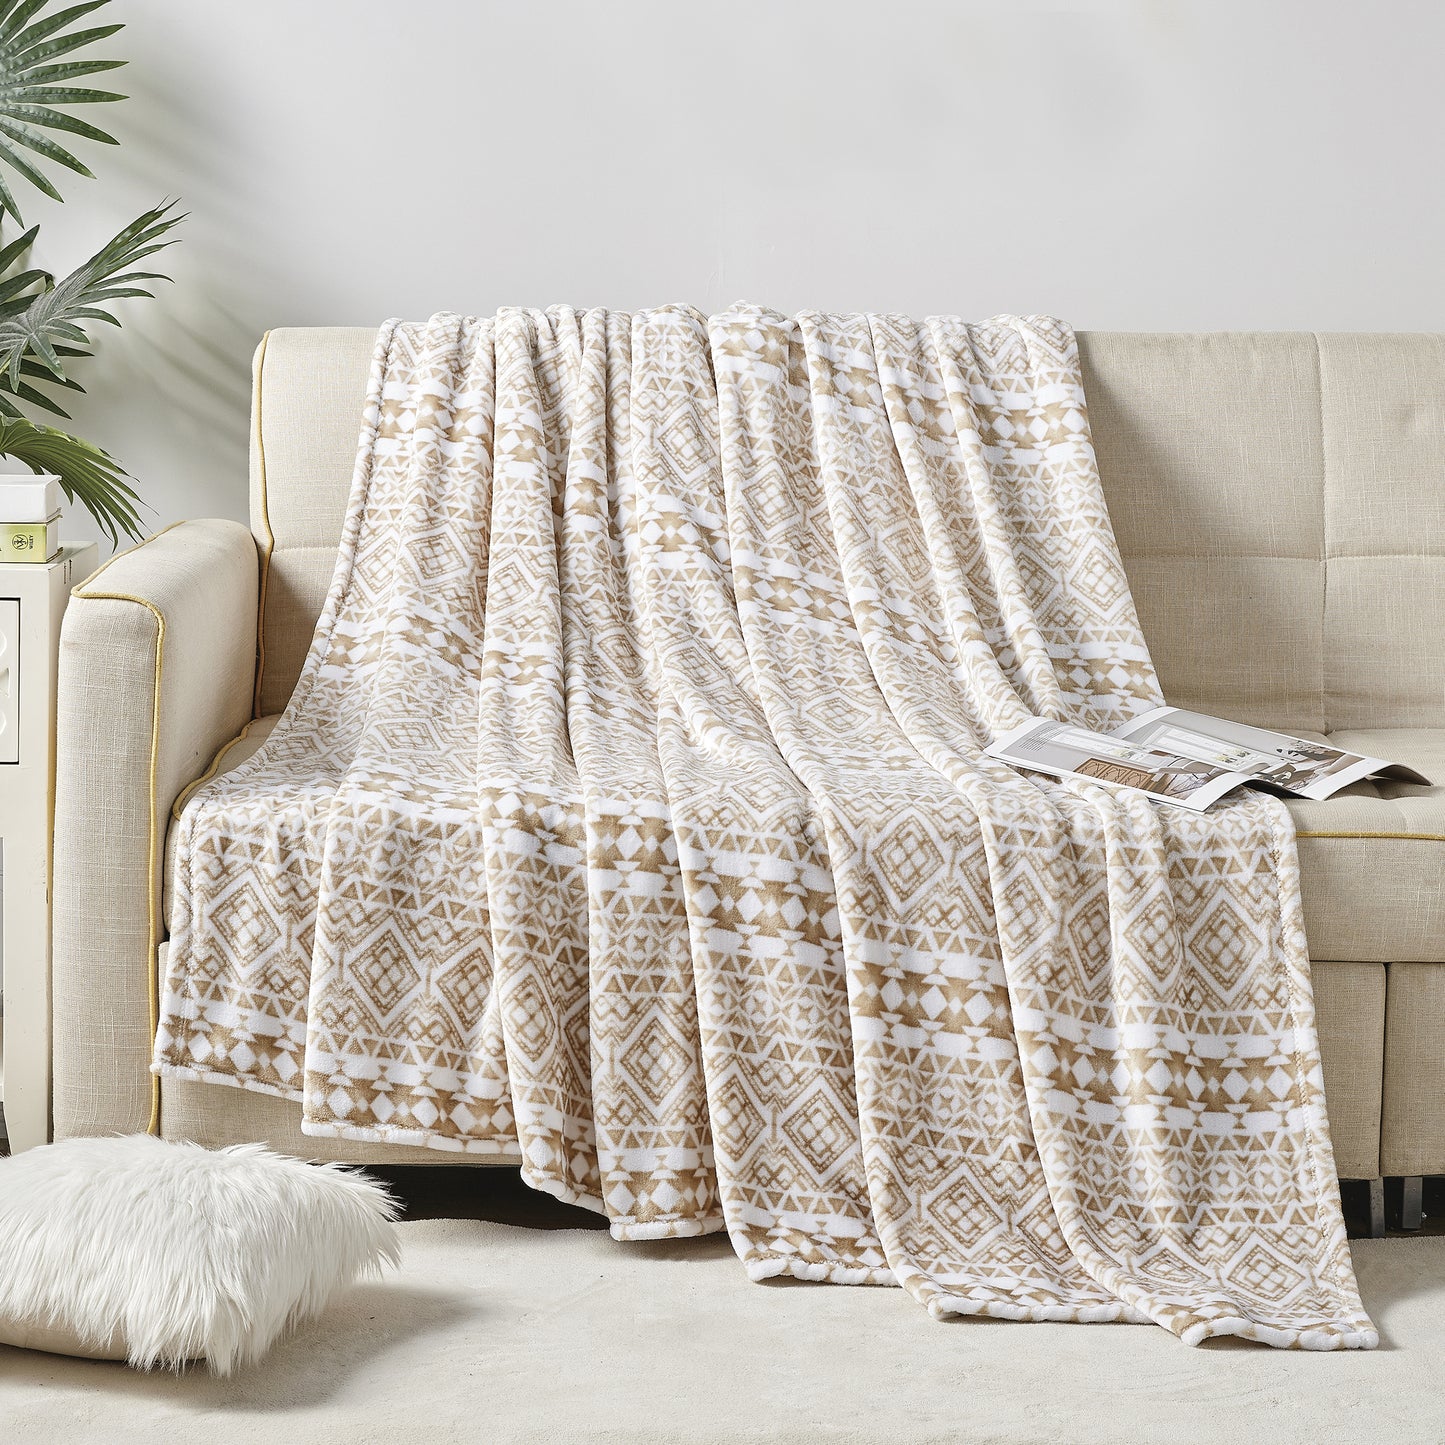 Elegant Comfort Printed Bed or Oversized Couch Blanket - Lightweight for All Season Warmth